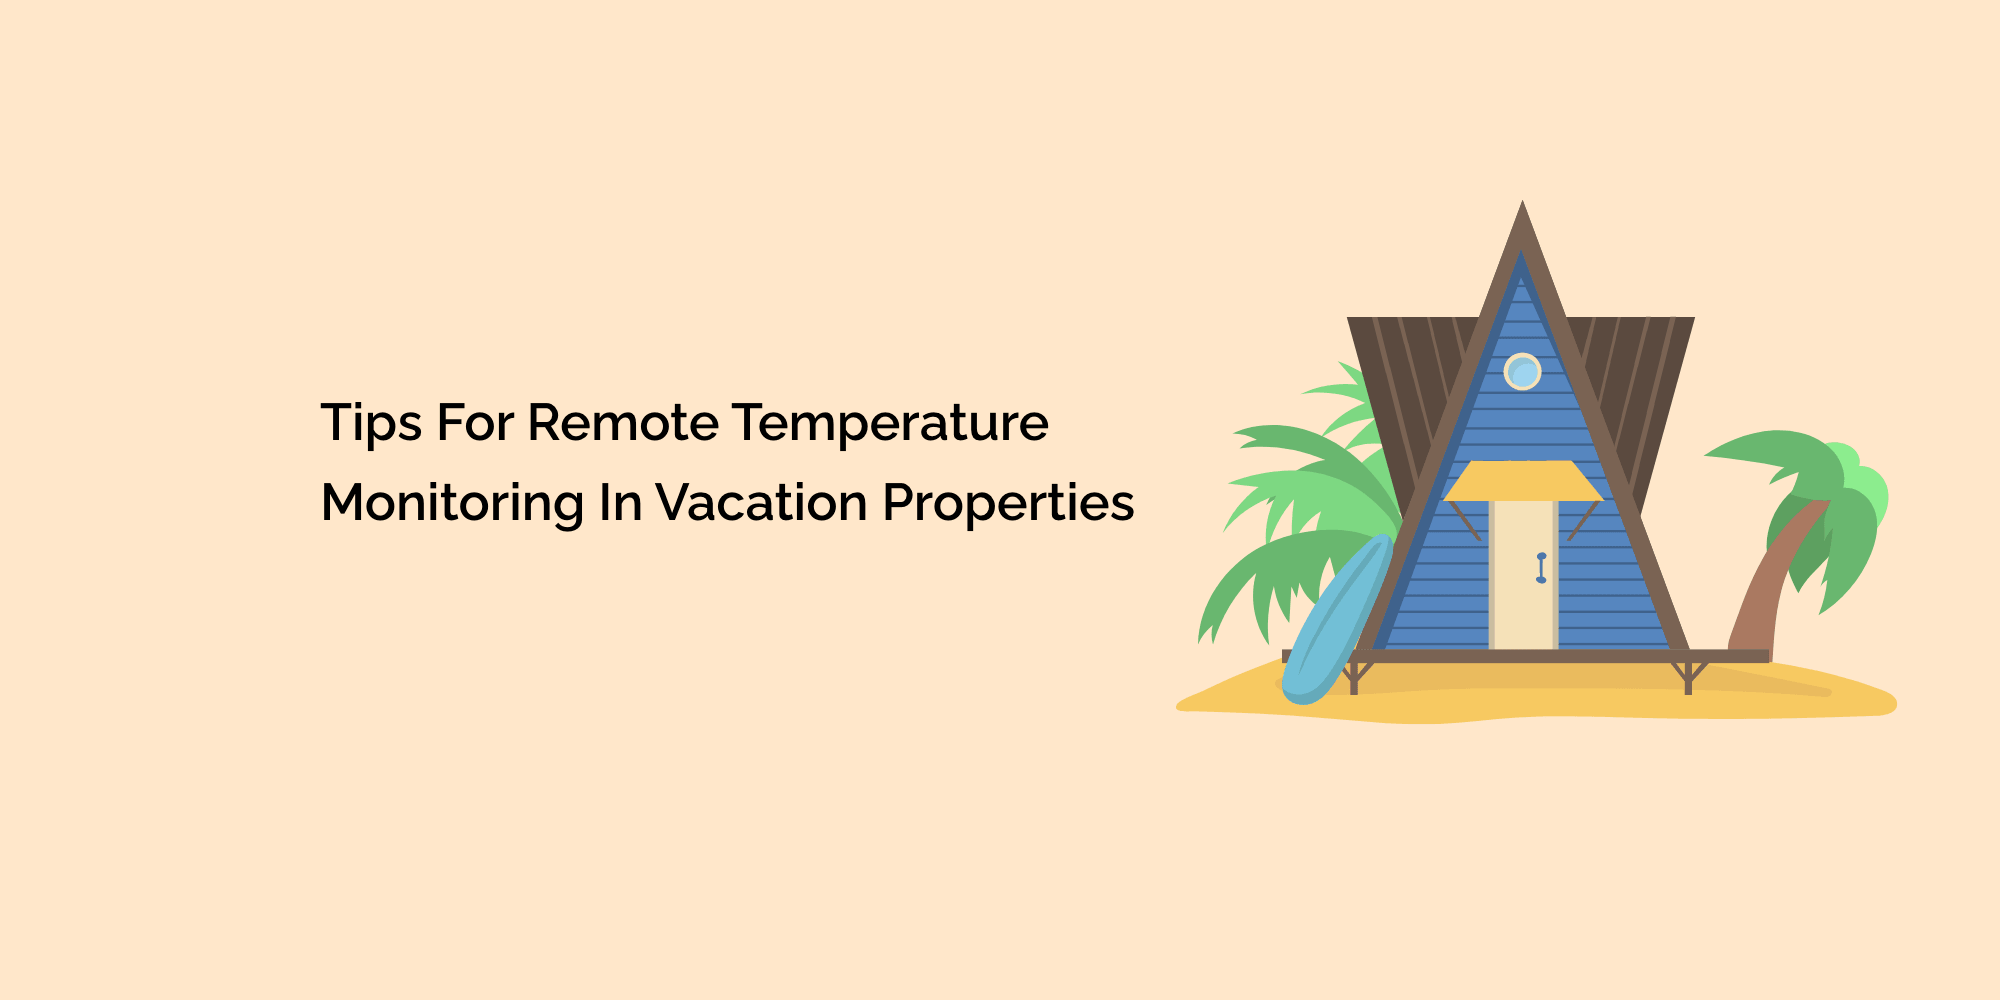 Tips for Remote Temperature Monitoring in Vacation Properties